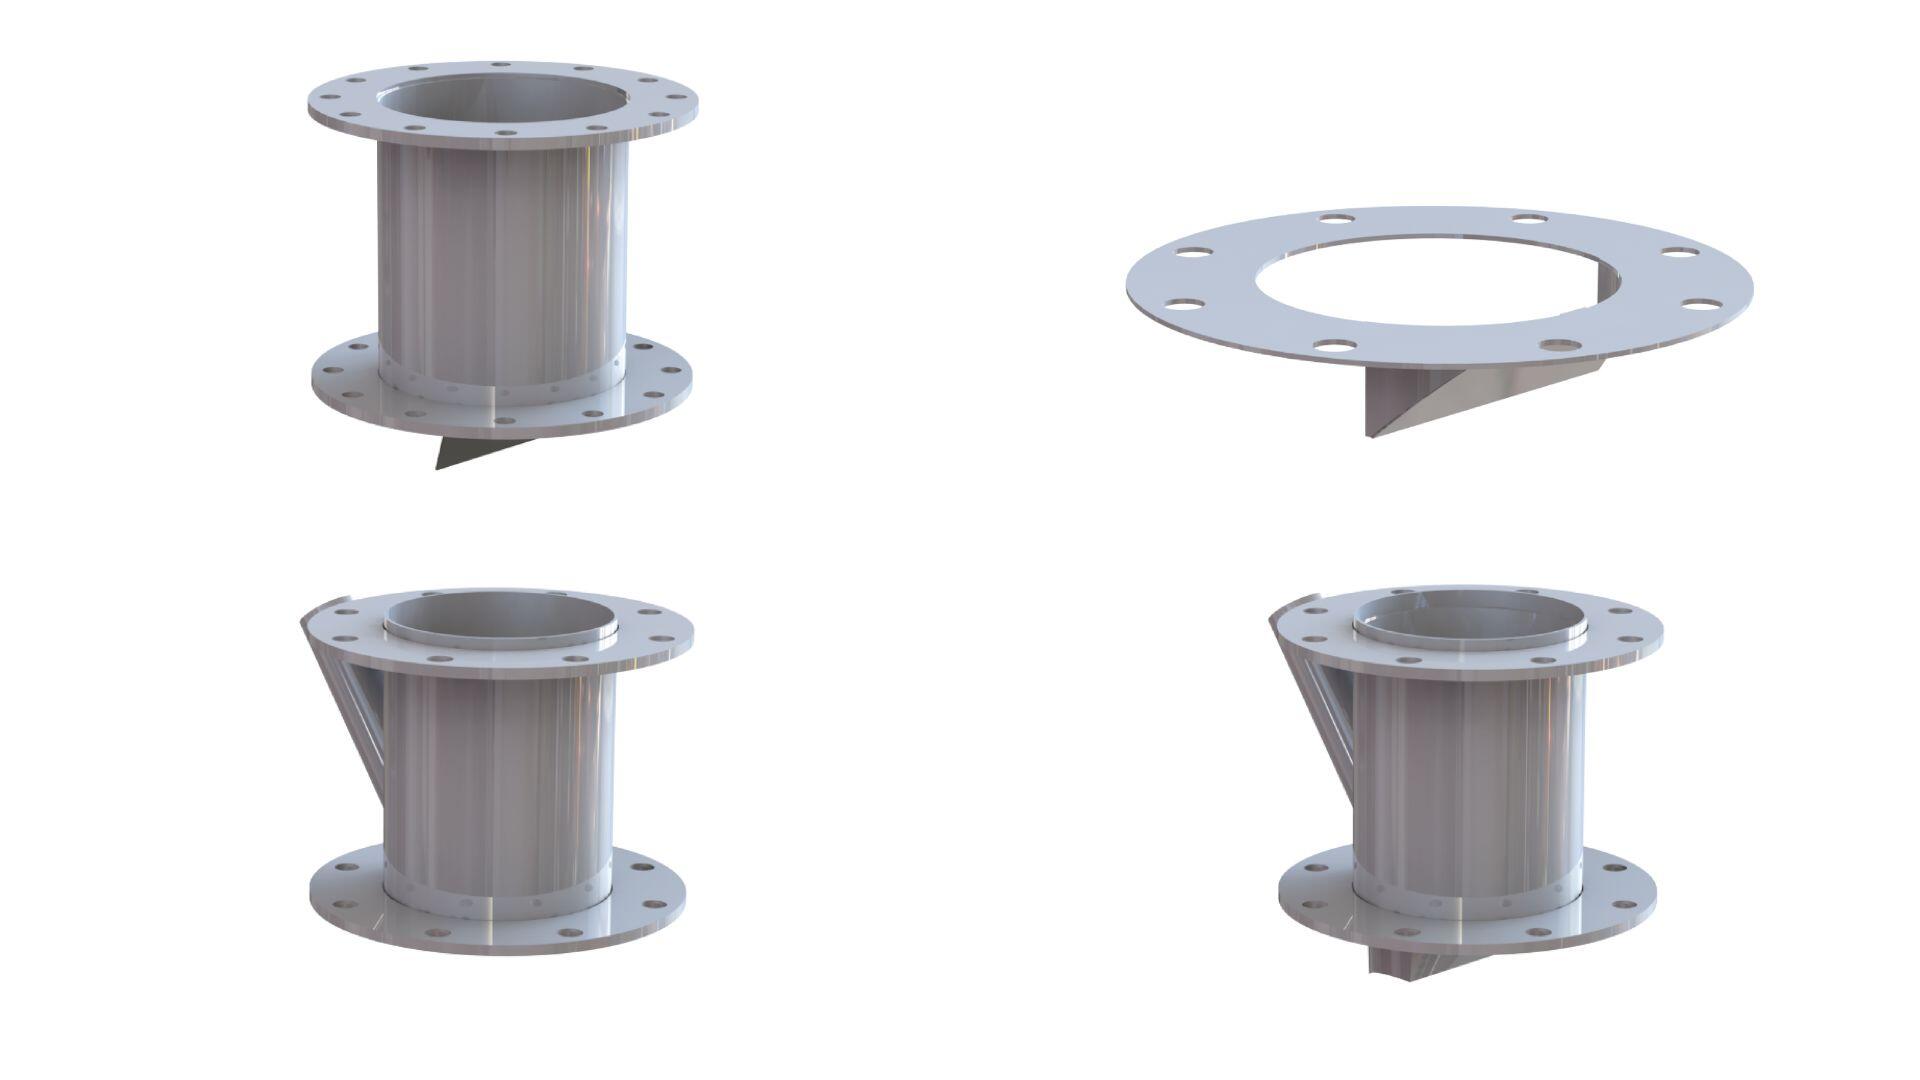 TBMA Inlet and vent adapters for rotary valves